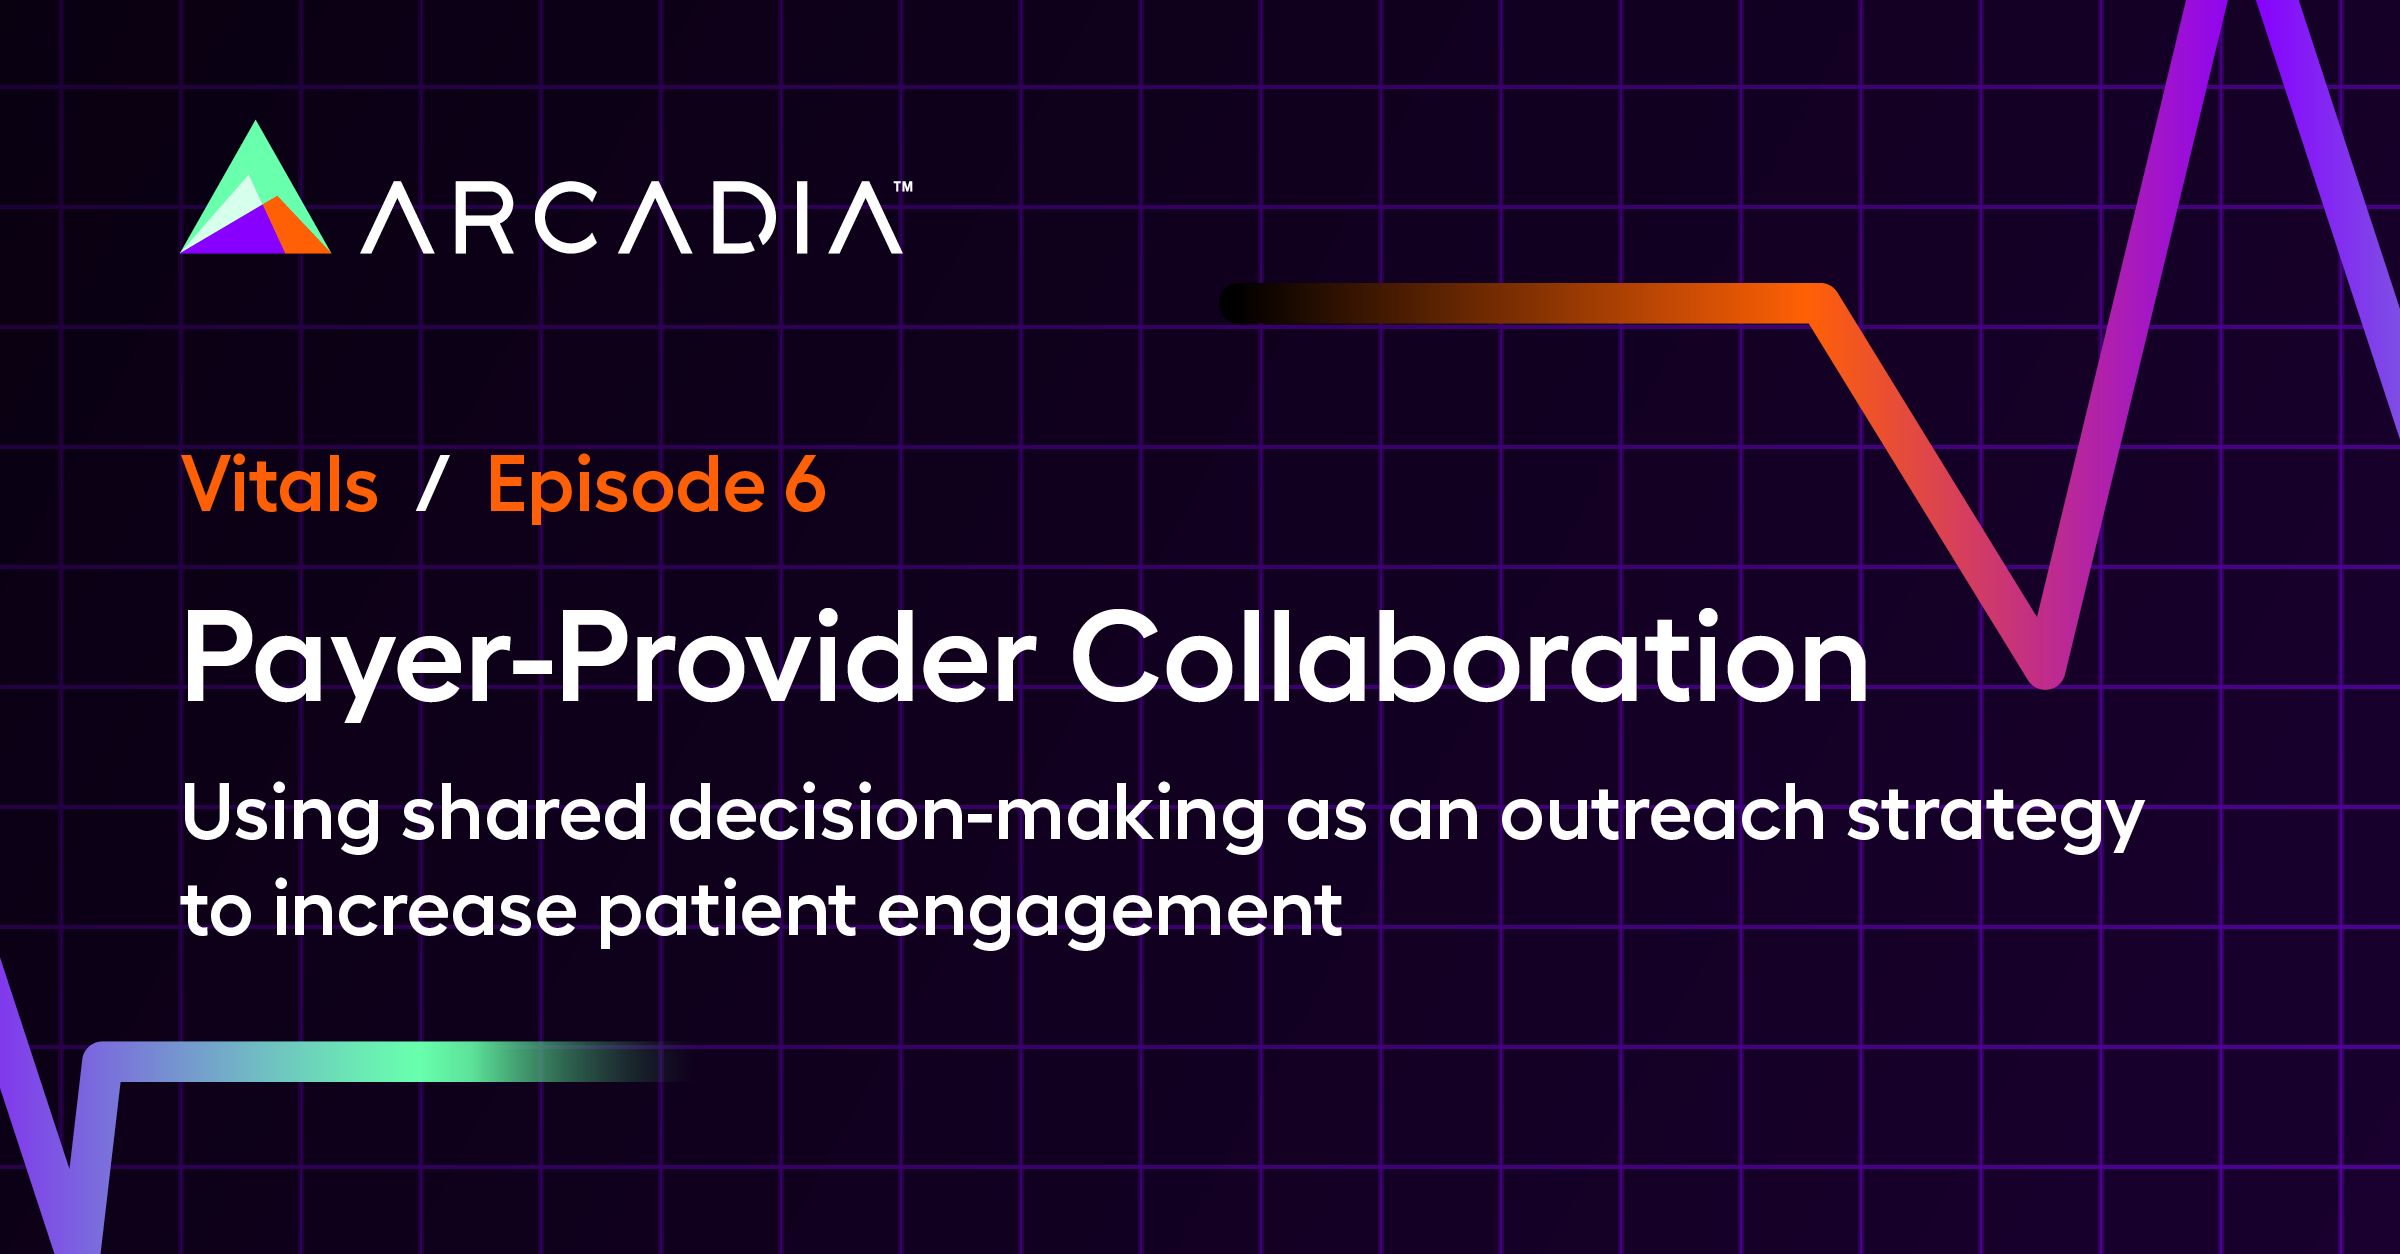 Payer-Provider Collaboration: Using shared decision-making as an outreach strategy to increase patient engagement